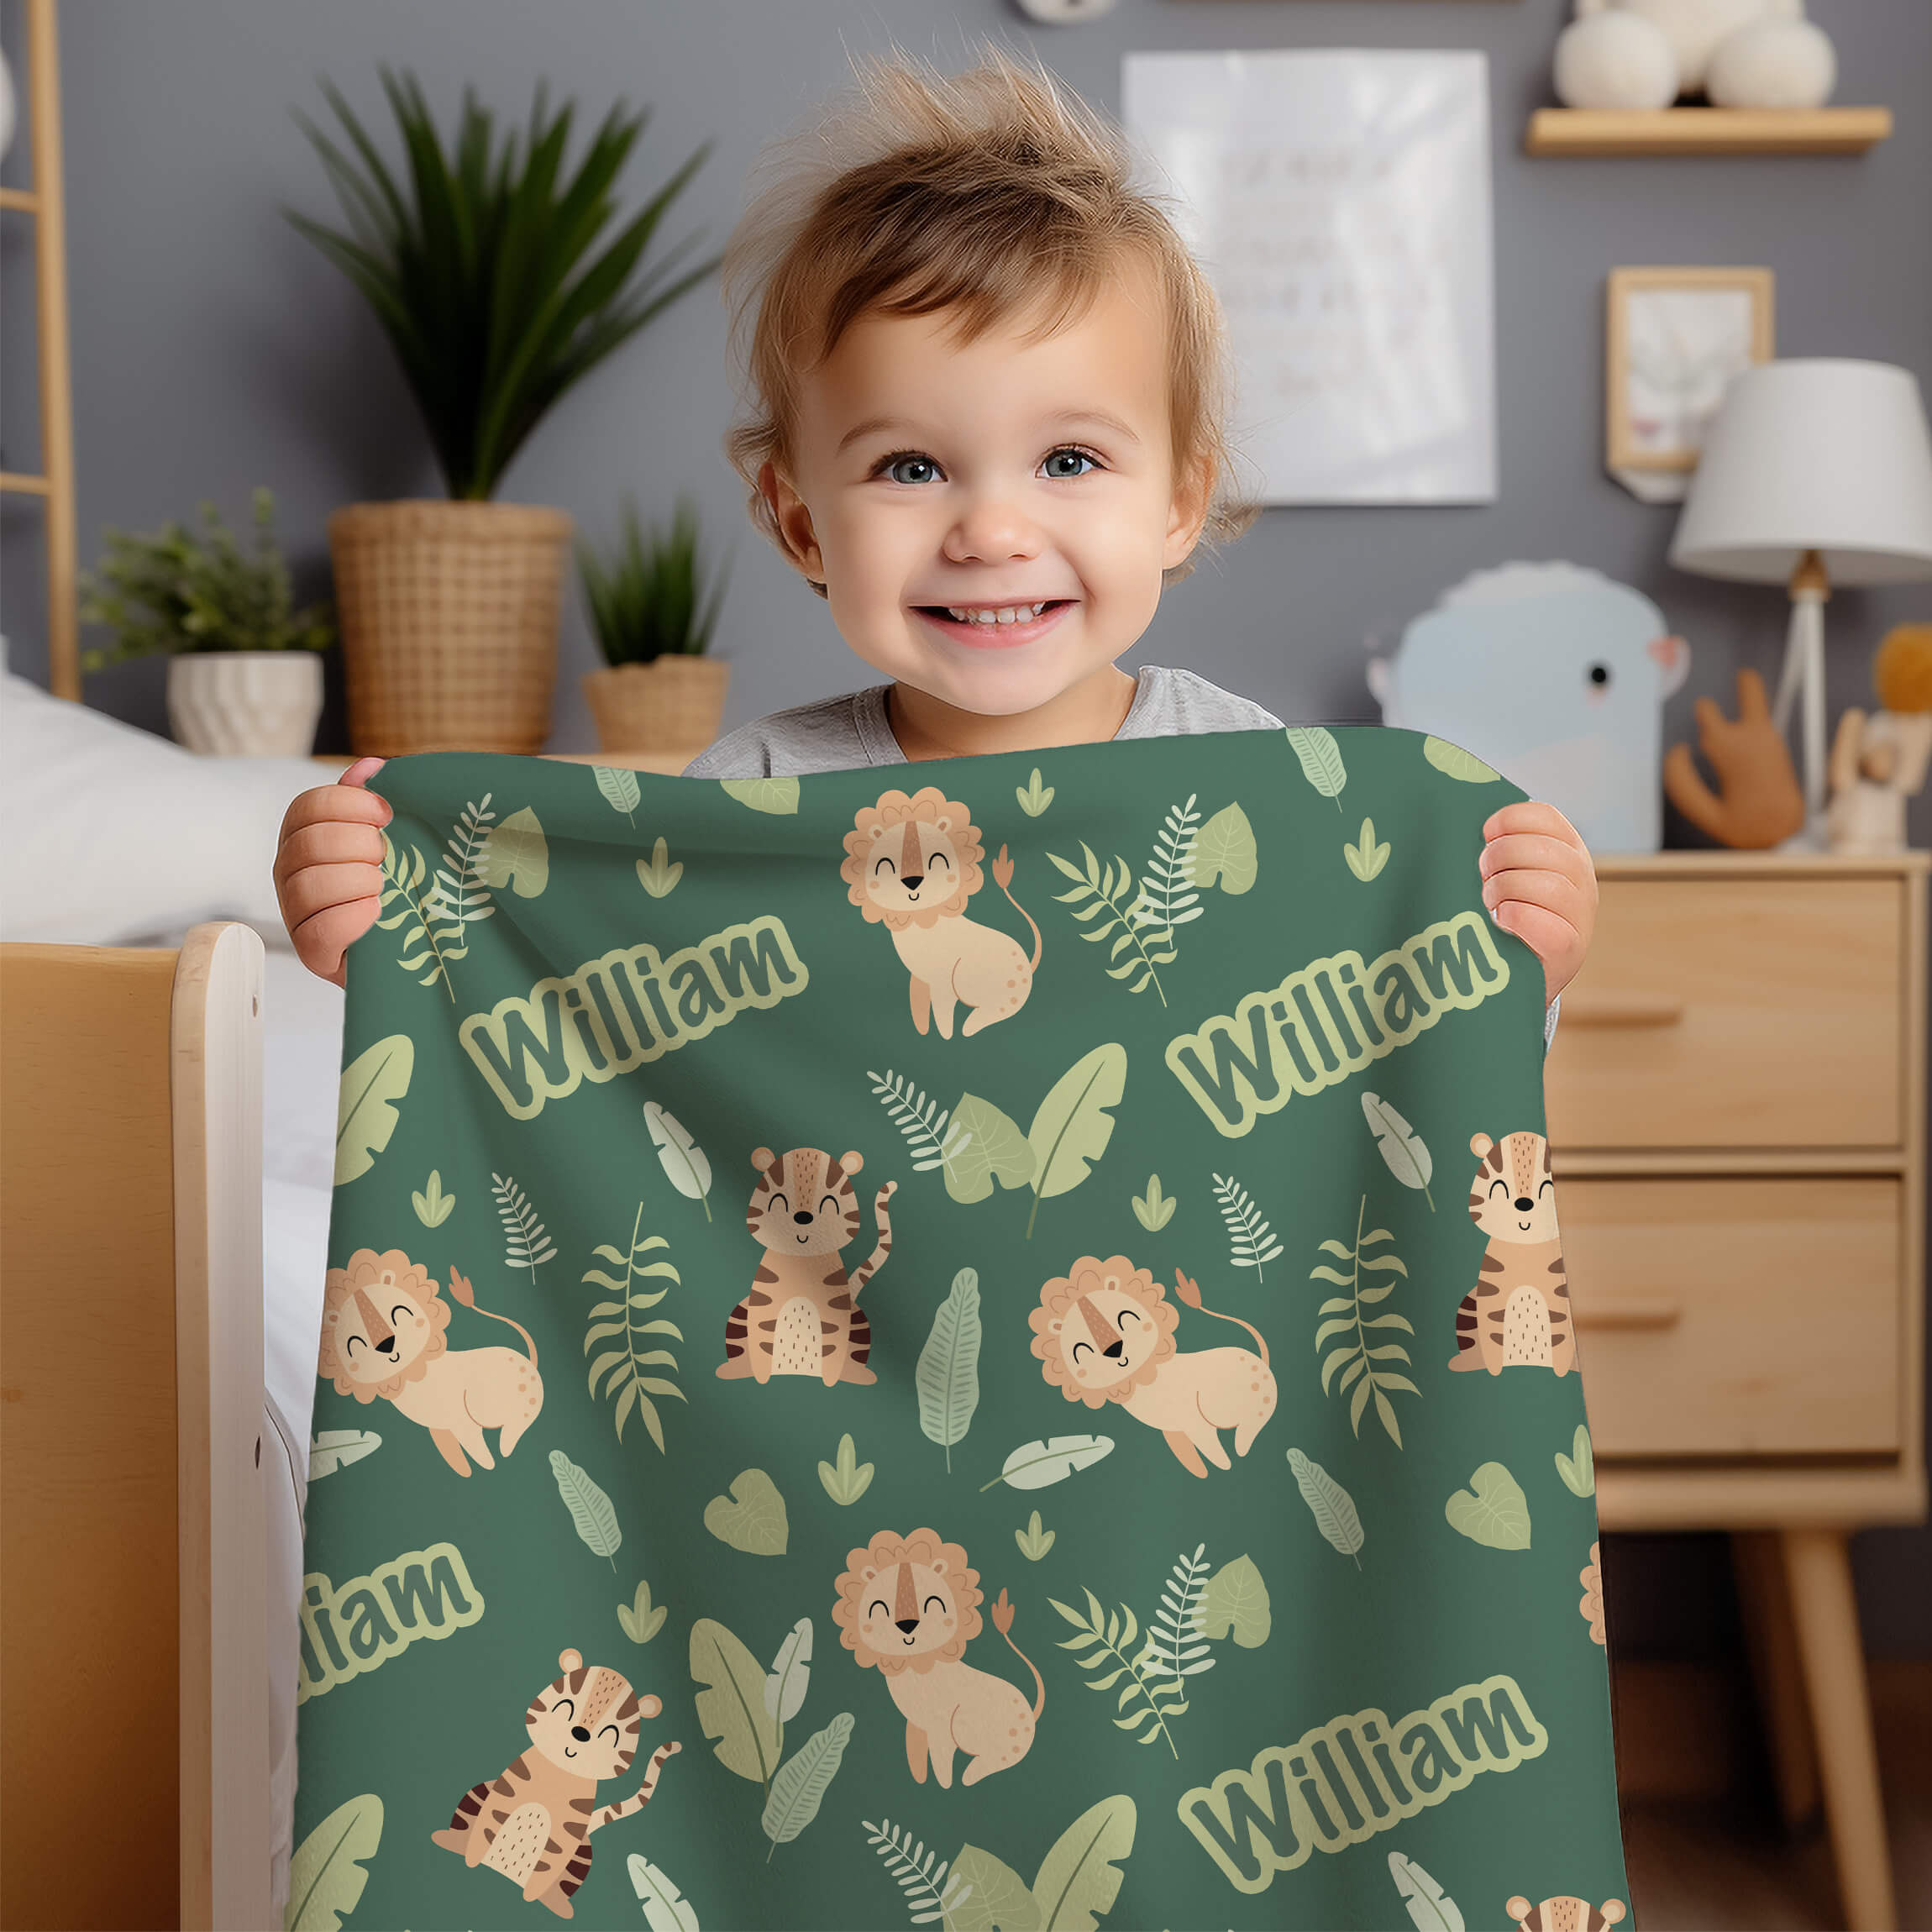 Personalized Name Blanket - Lions & Tigers